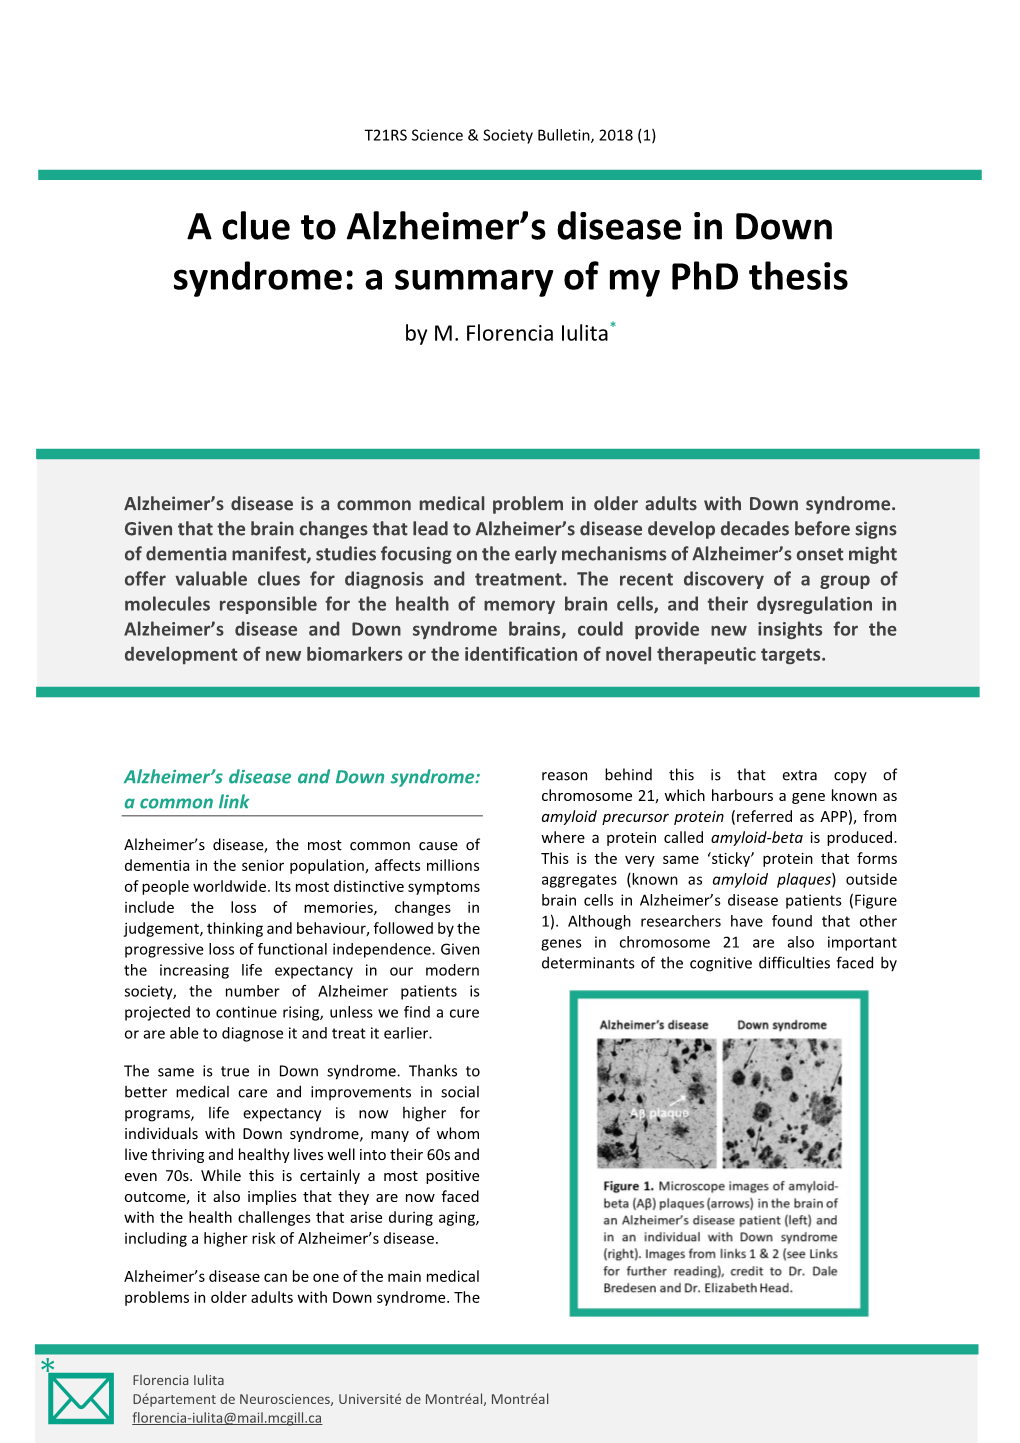 A Clue to Alzheimer's Disease in Down Syndrome: a Summary of My Phd